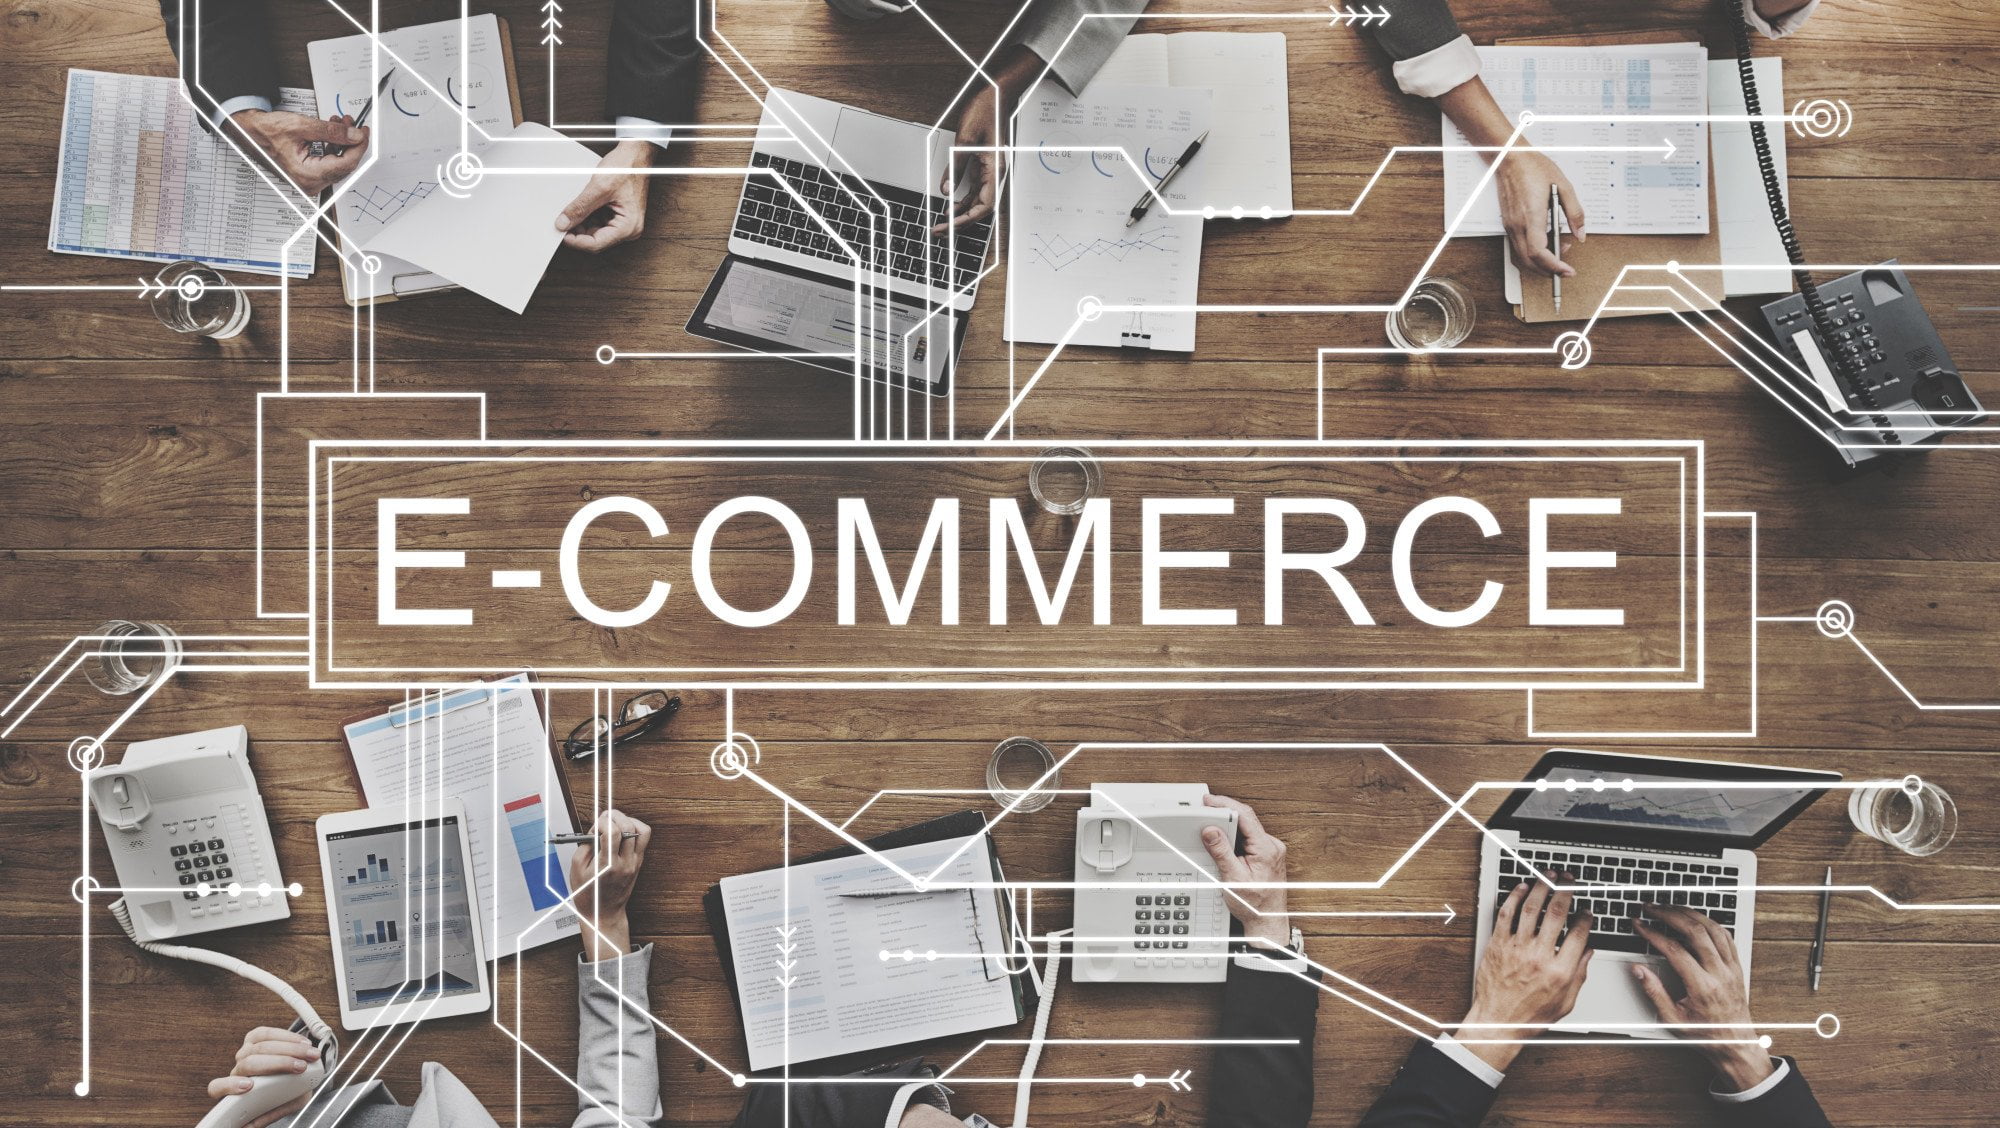 5 Tips for Creating an Effective Ecommerce Business Plan